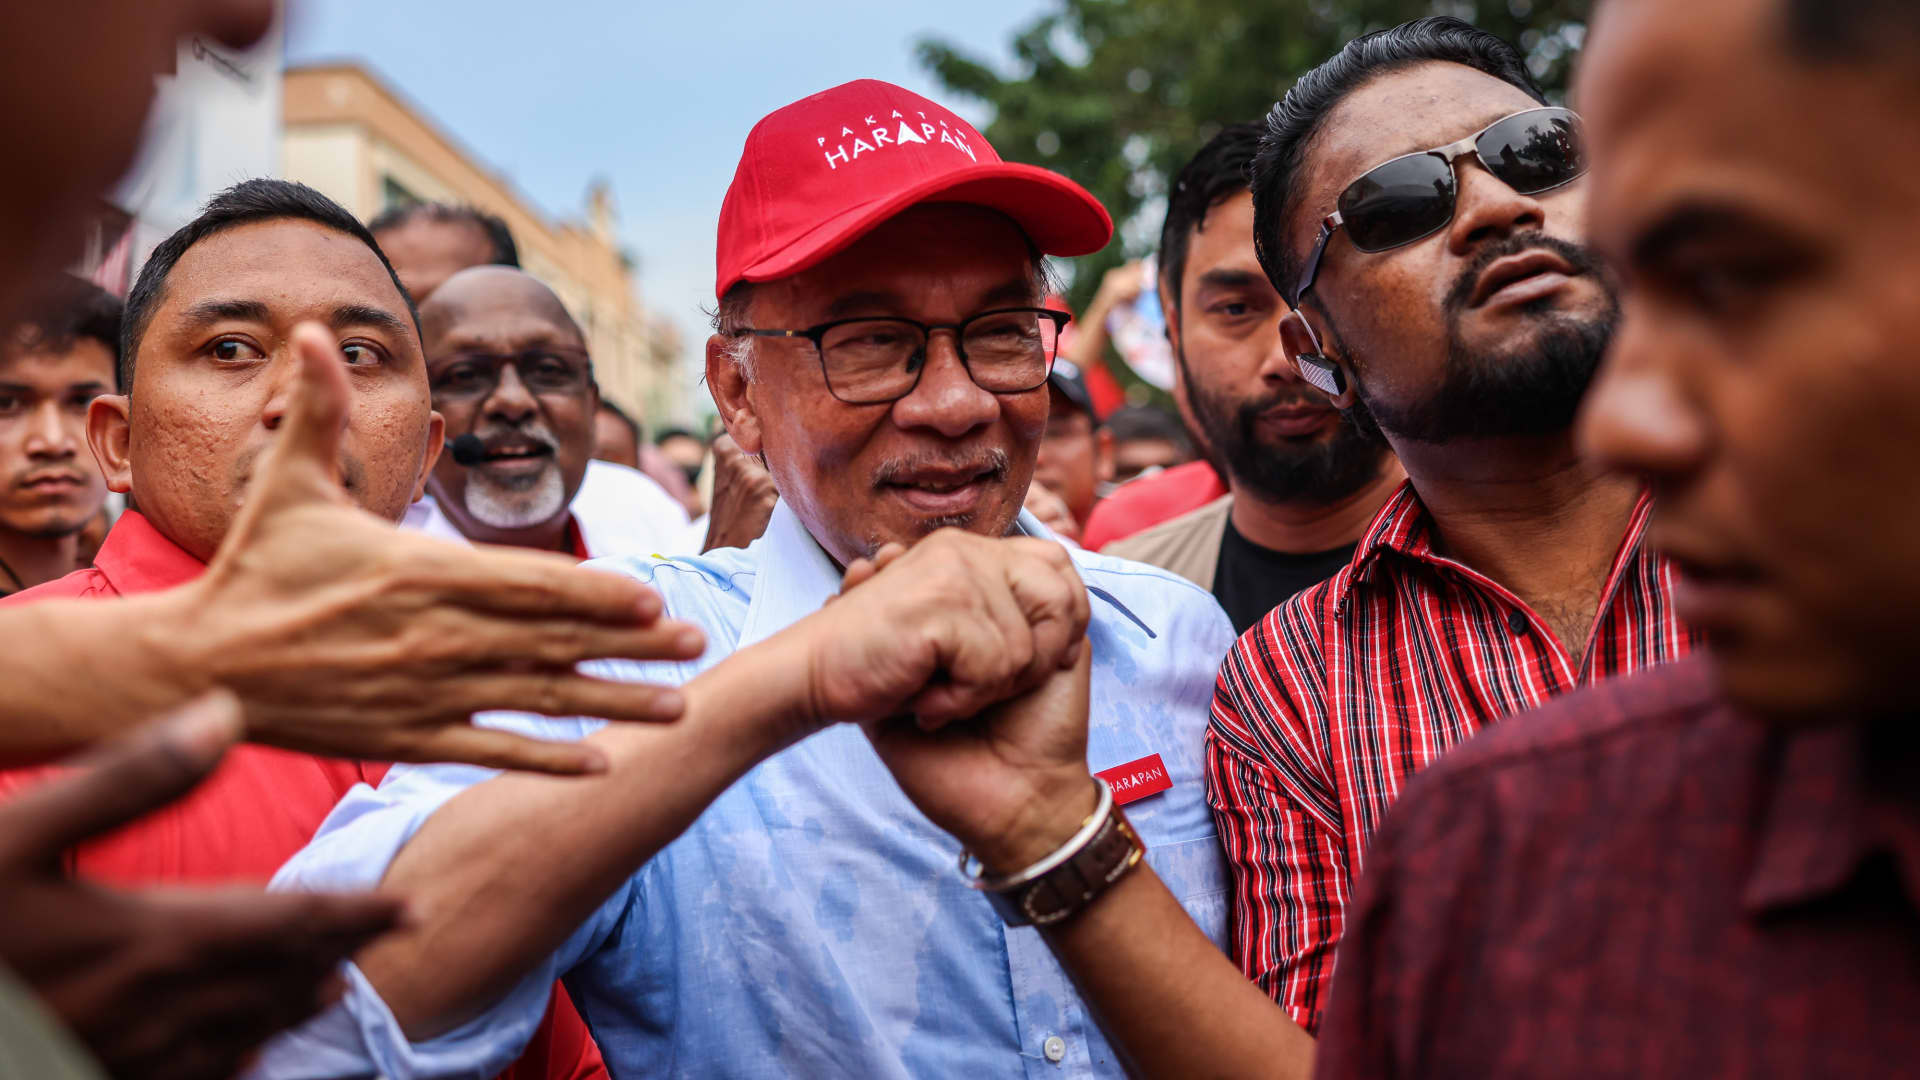 Anwar Ibrahim makes history as tenth Malaysian prime minister - CNBC